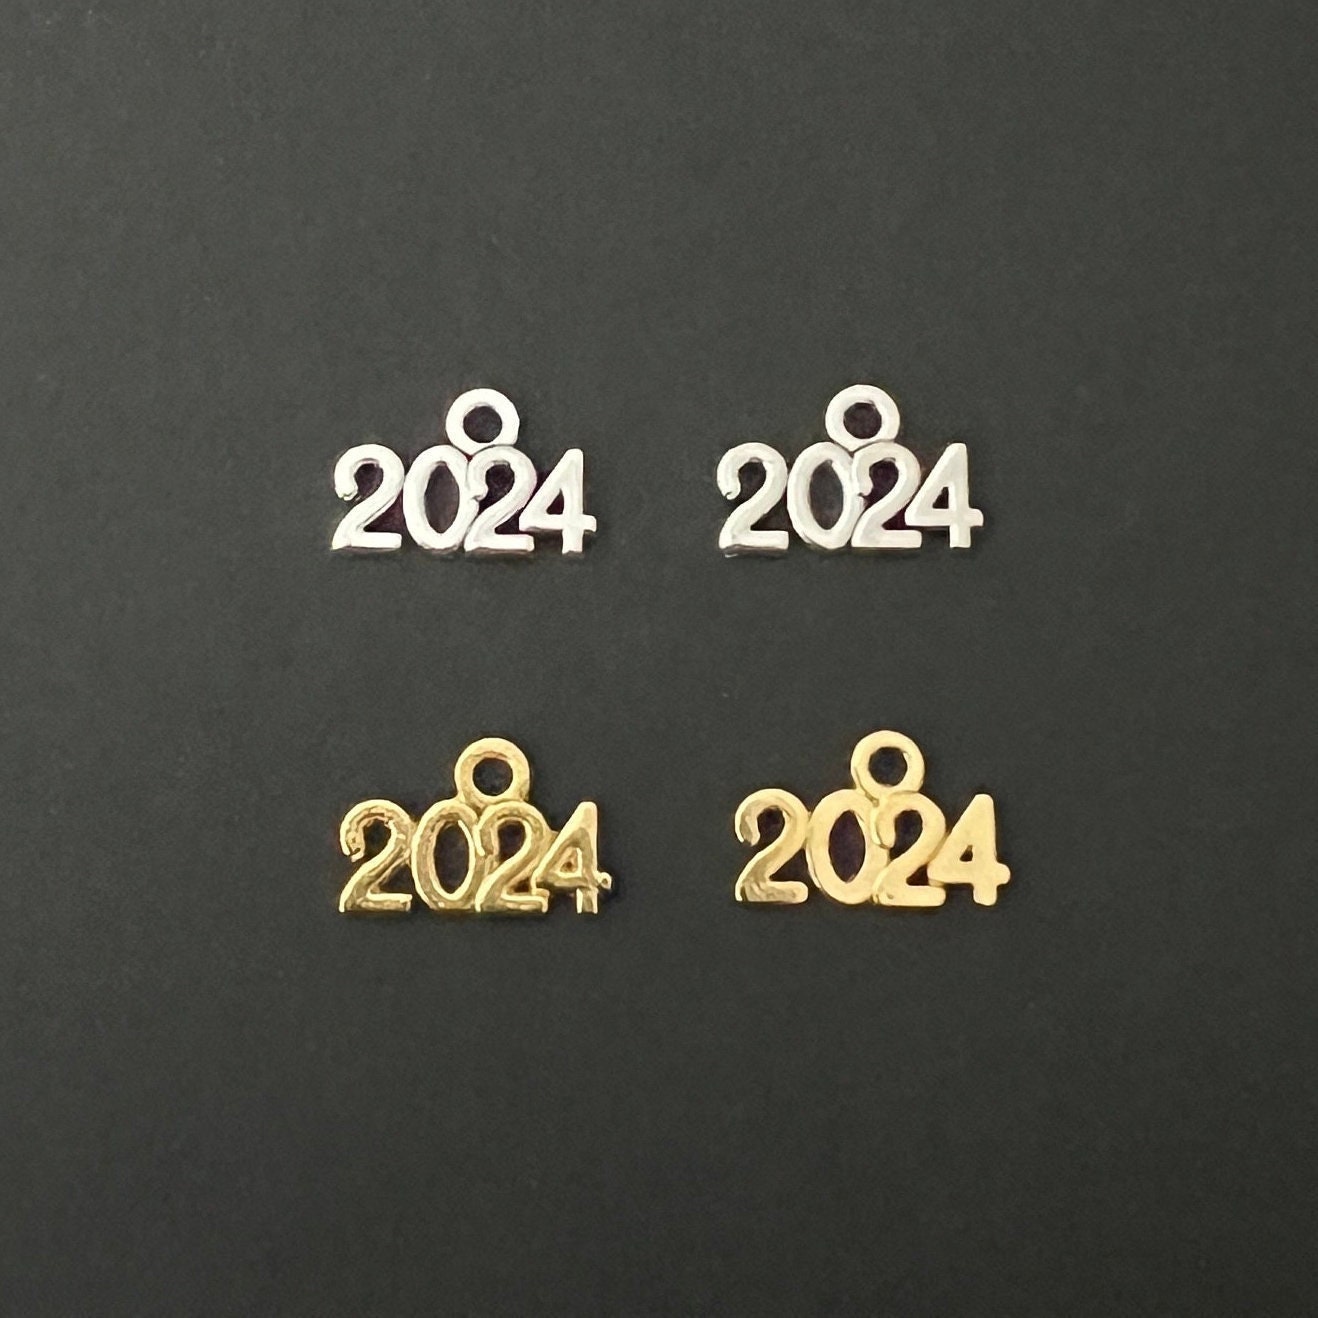 2024 YEAR 24 NUMBER CHARMS GOLD / SILVER ANNIVERSARY GRADUATION BIRTHDAY  $5.99